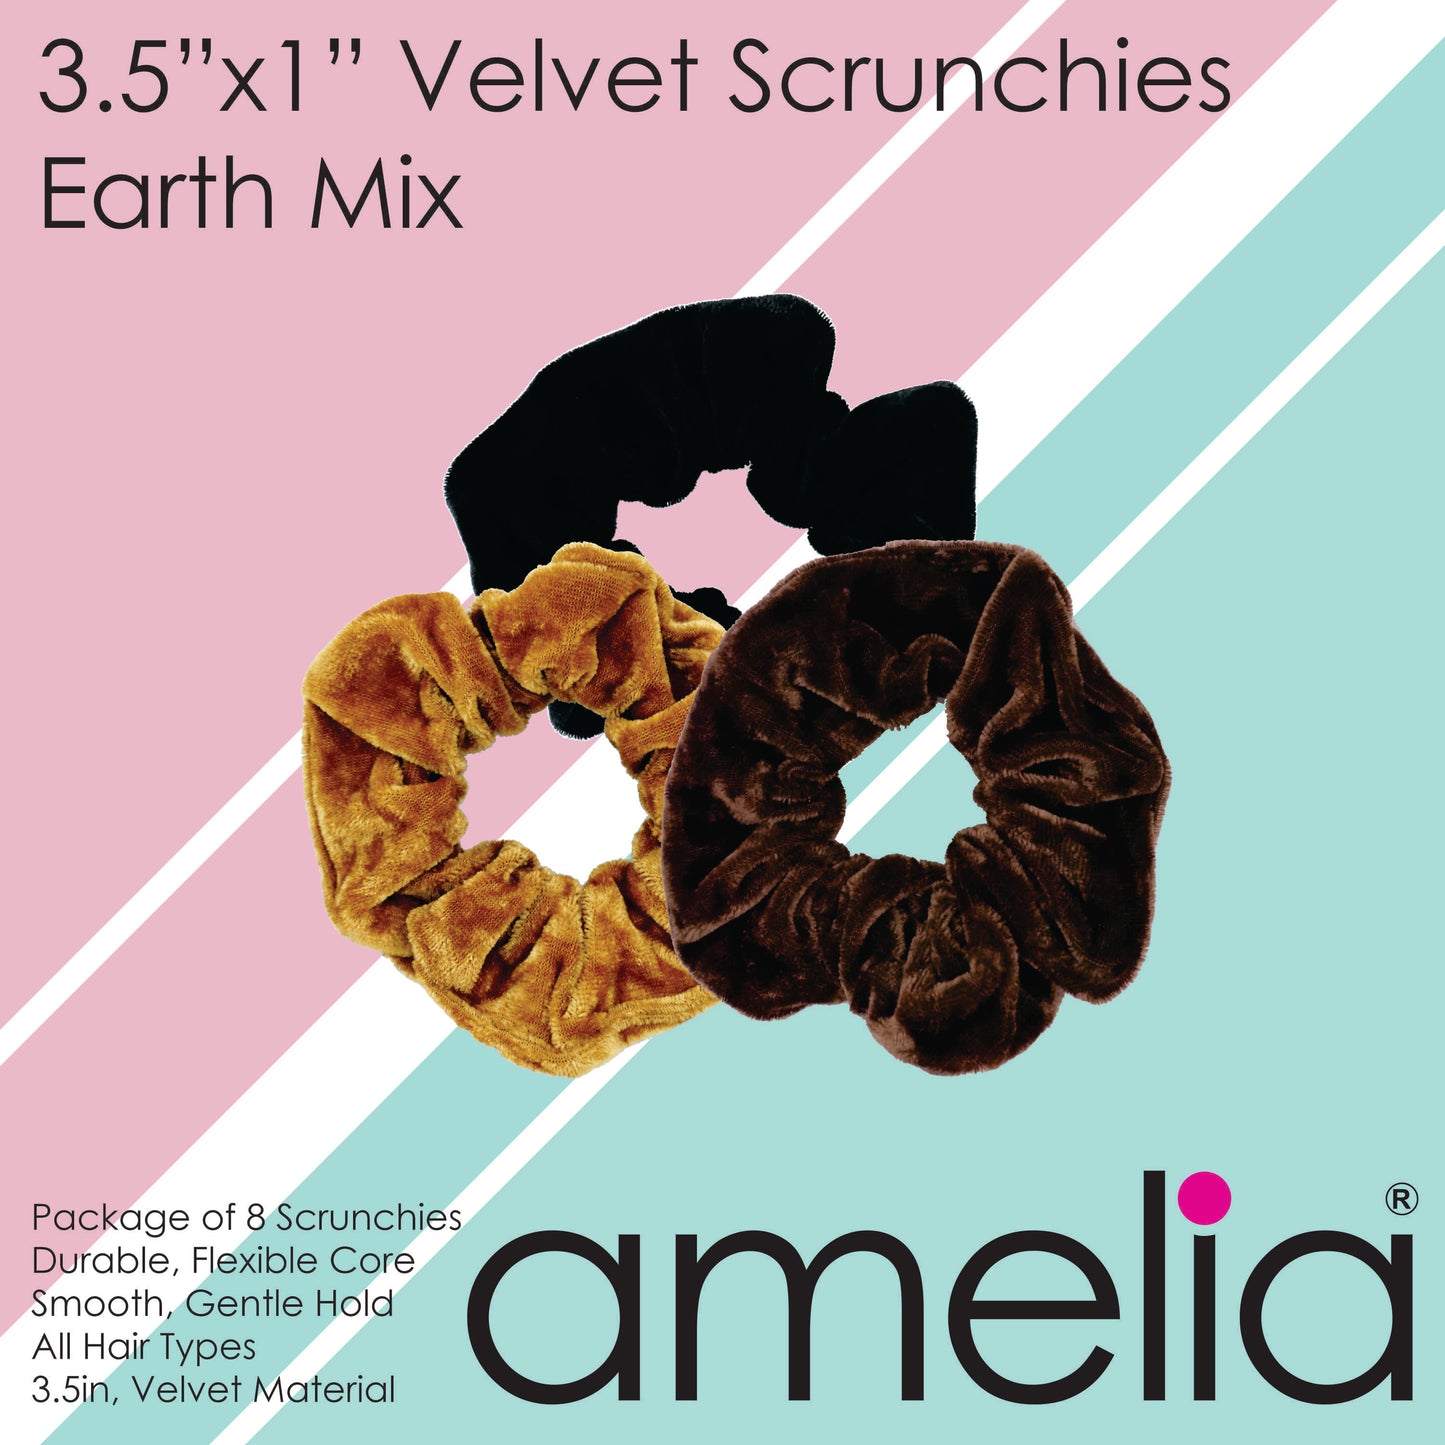 Amelia Beauty, Earth Blend Velvet Scrunchies, 3.5in Diameter, Gentle on Hair, Strong Hold, No Snag, No Dents or Creases. 8 Pack